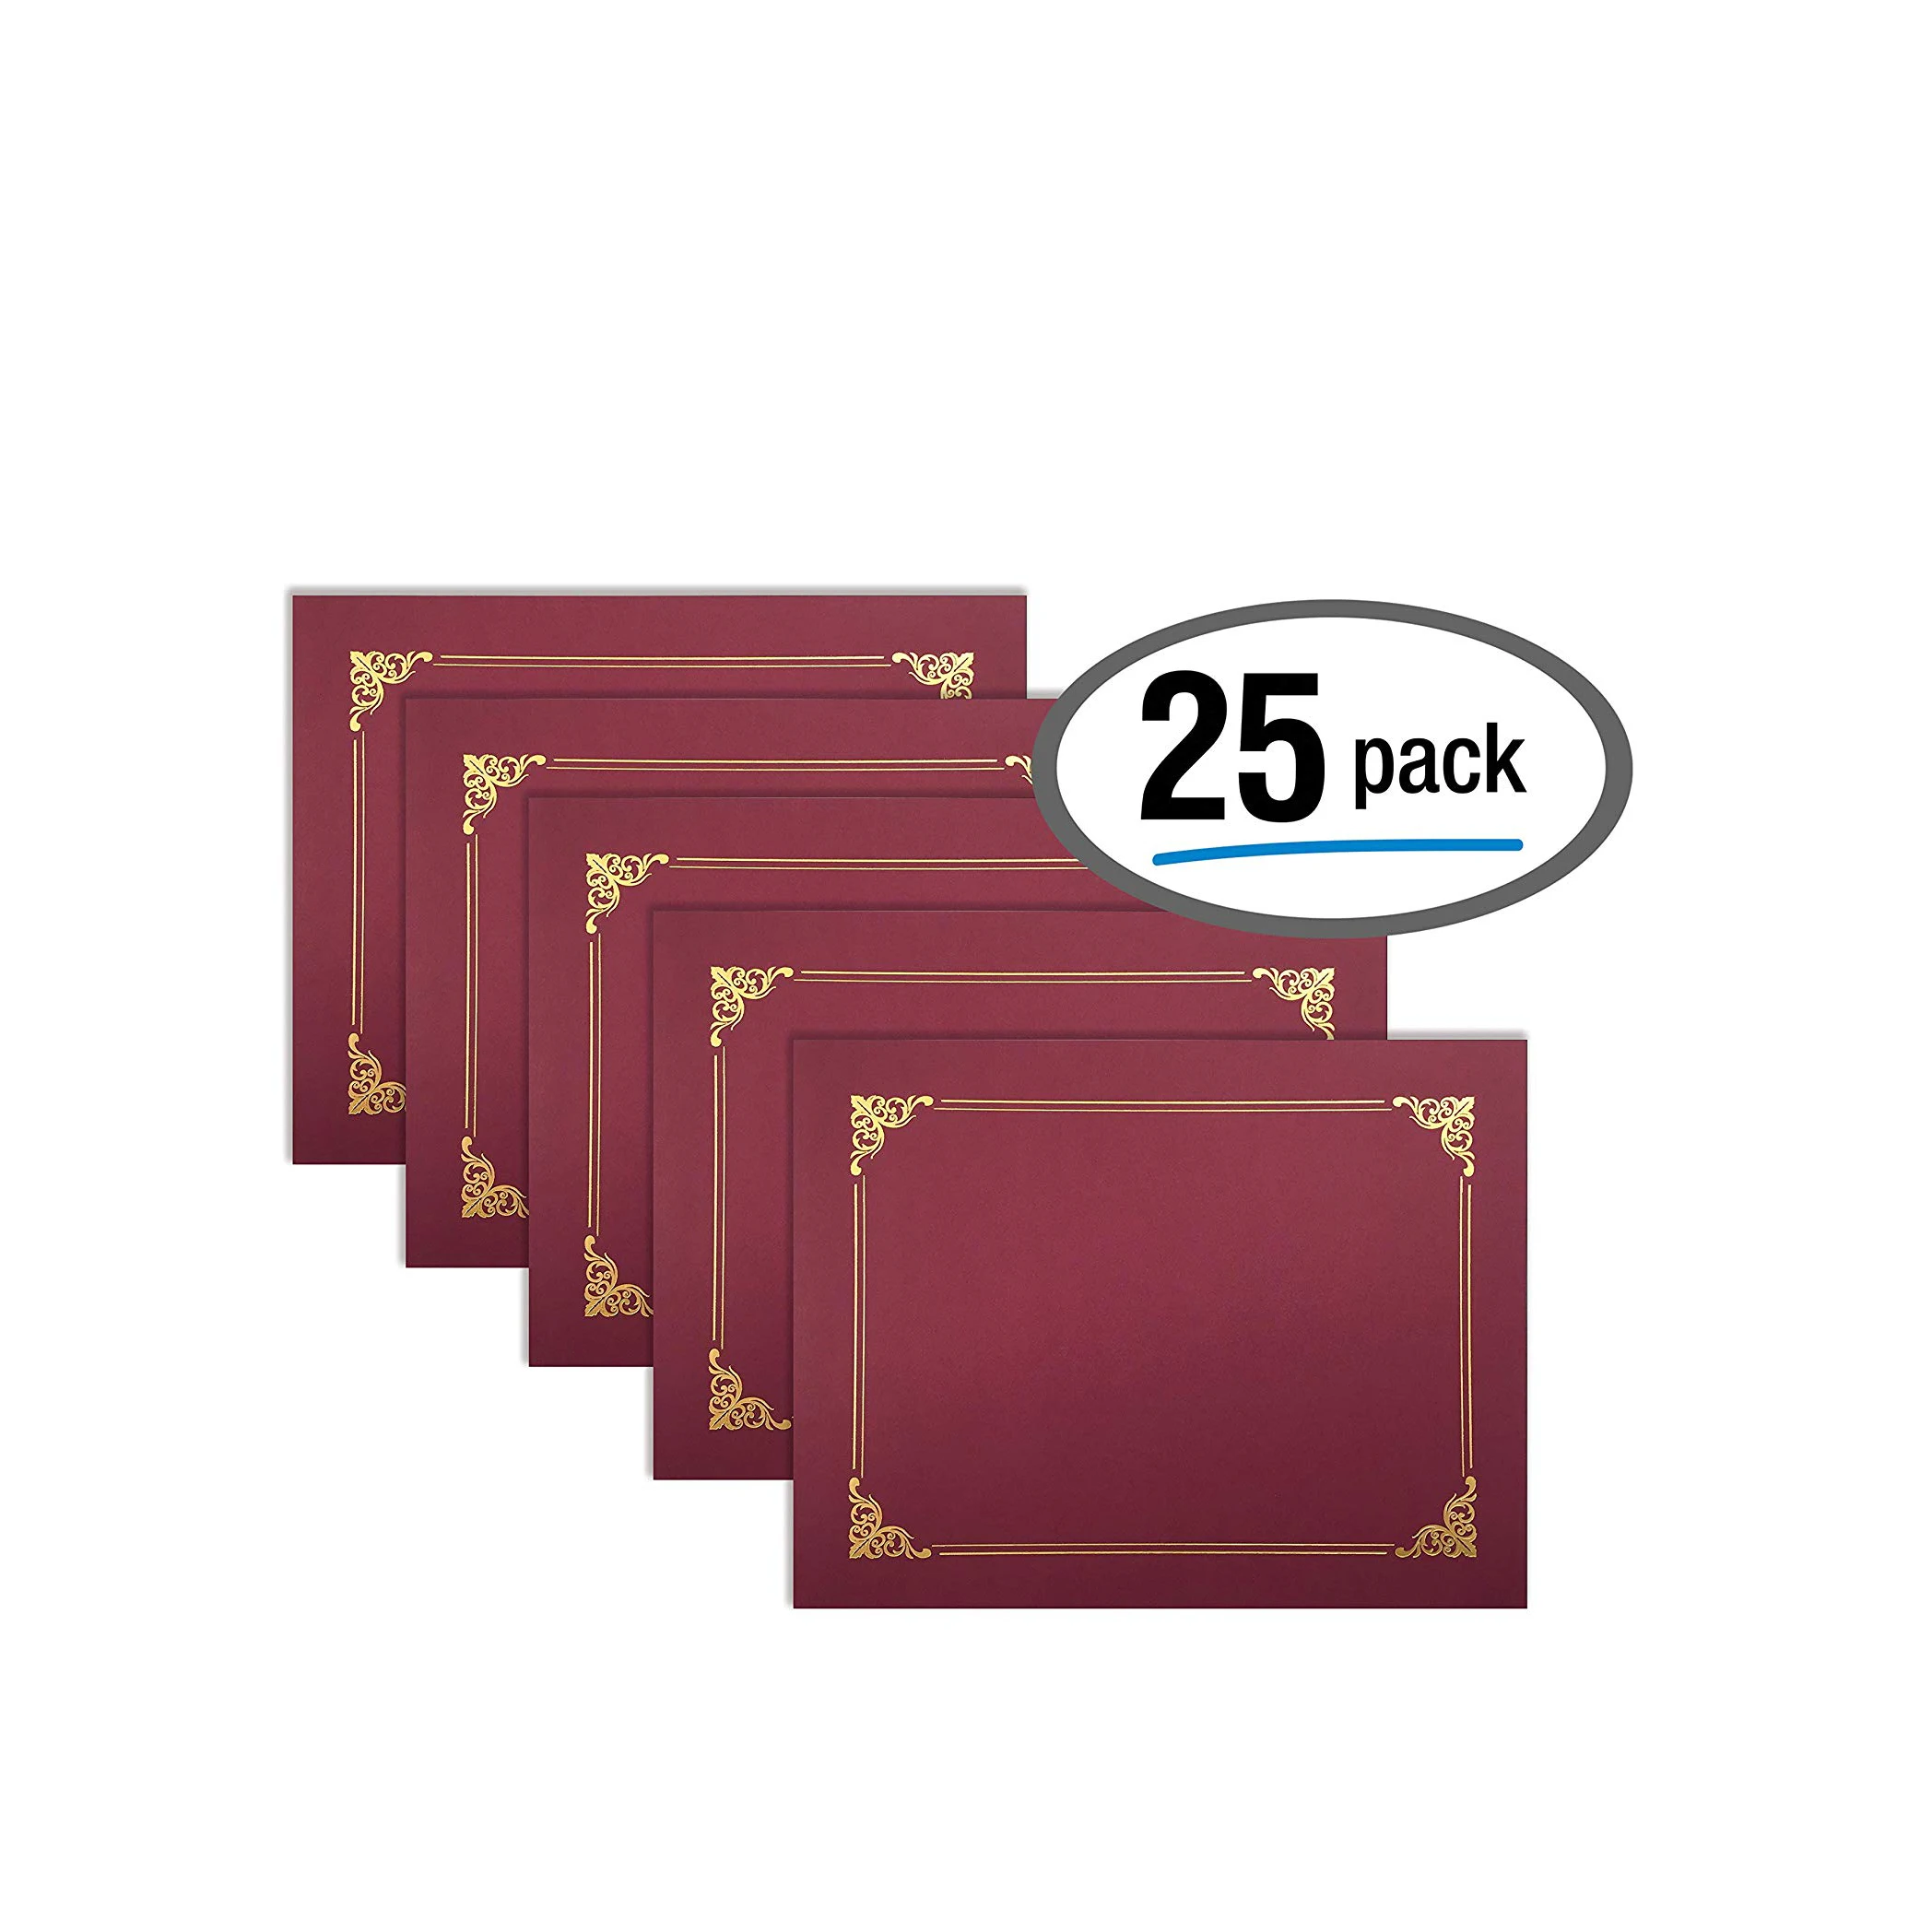 
25 Pack Red Certificate Holders Diploma Holders Document Covers with Gold Foil Border  (62249186874)